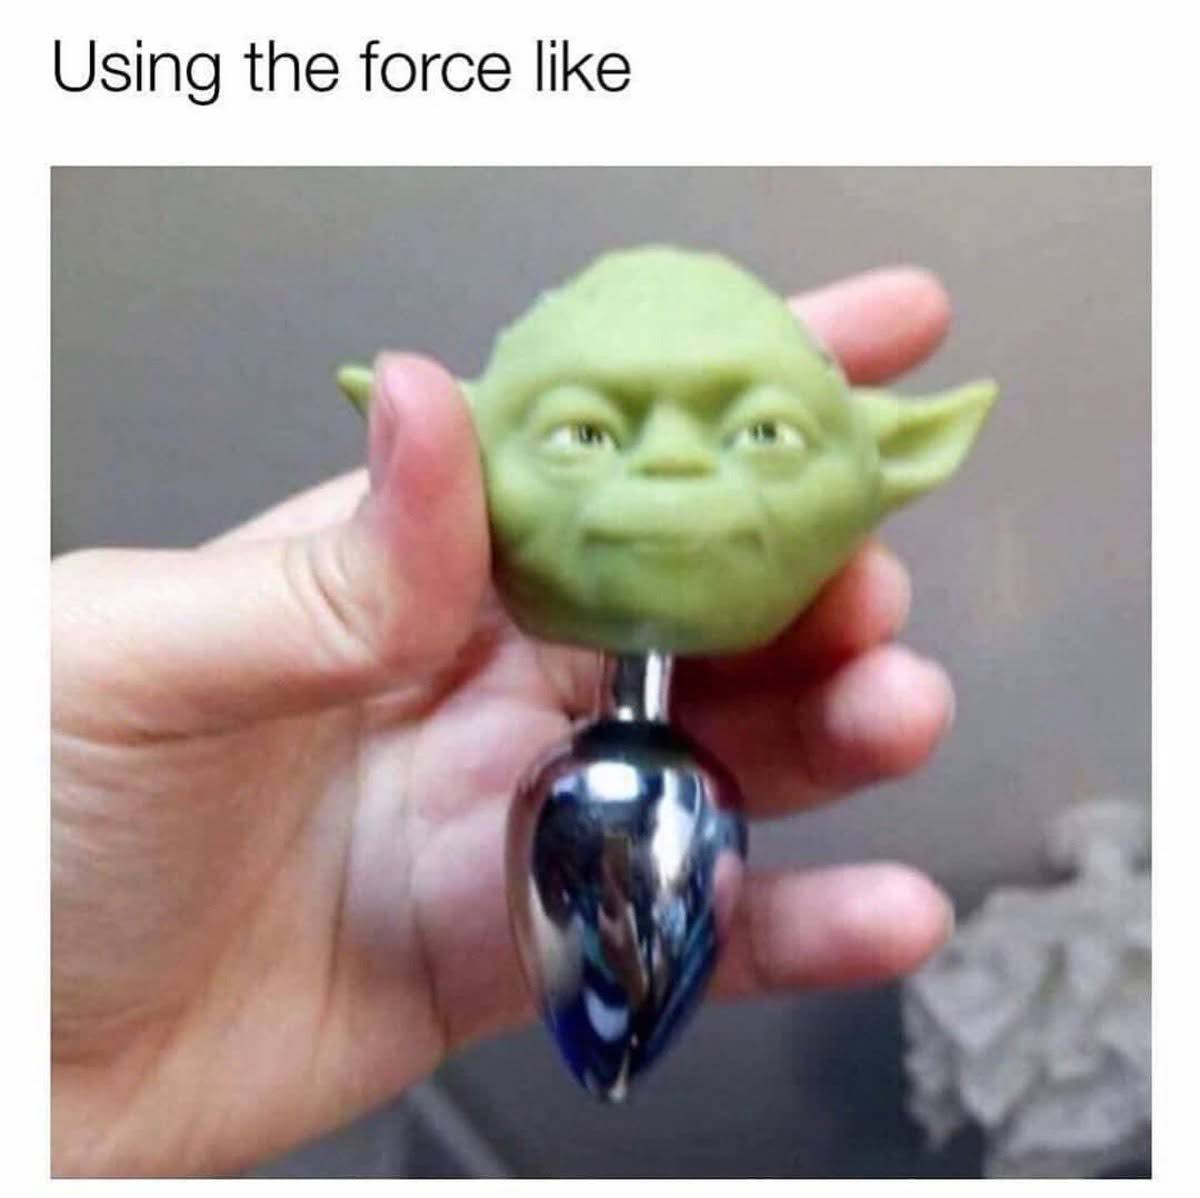 yoda buttplug - Using the force